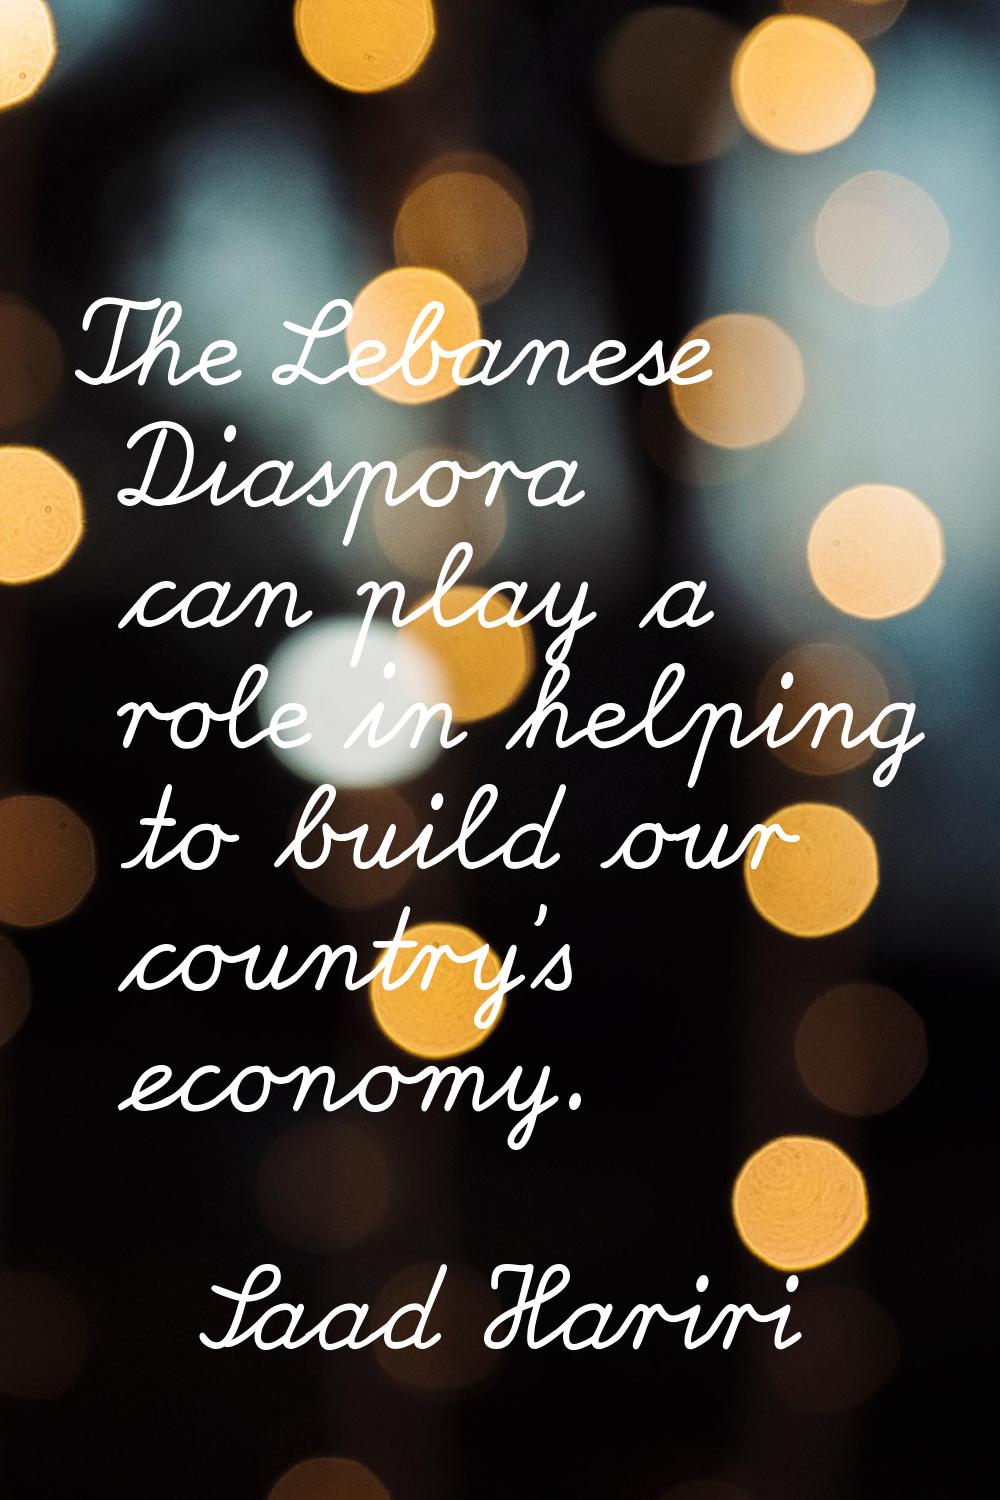 The Lebanese Diaspora can play a role in helping to build our country's economy.